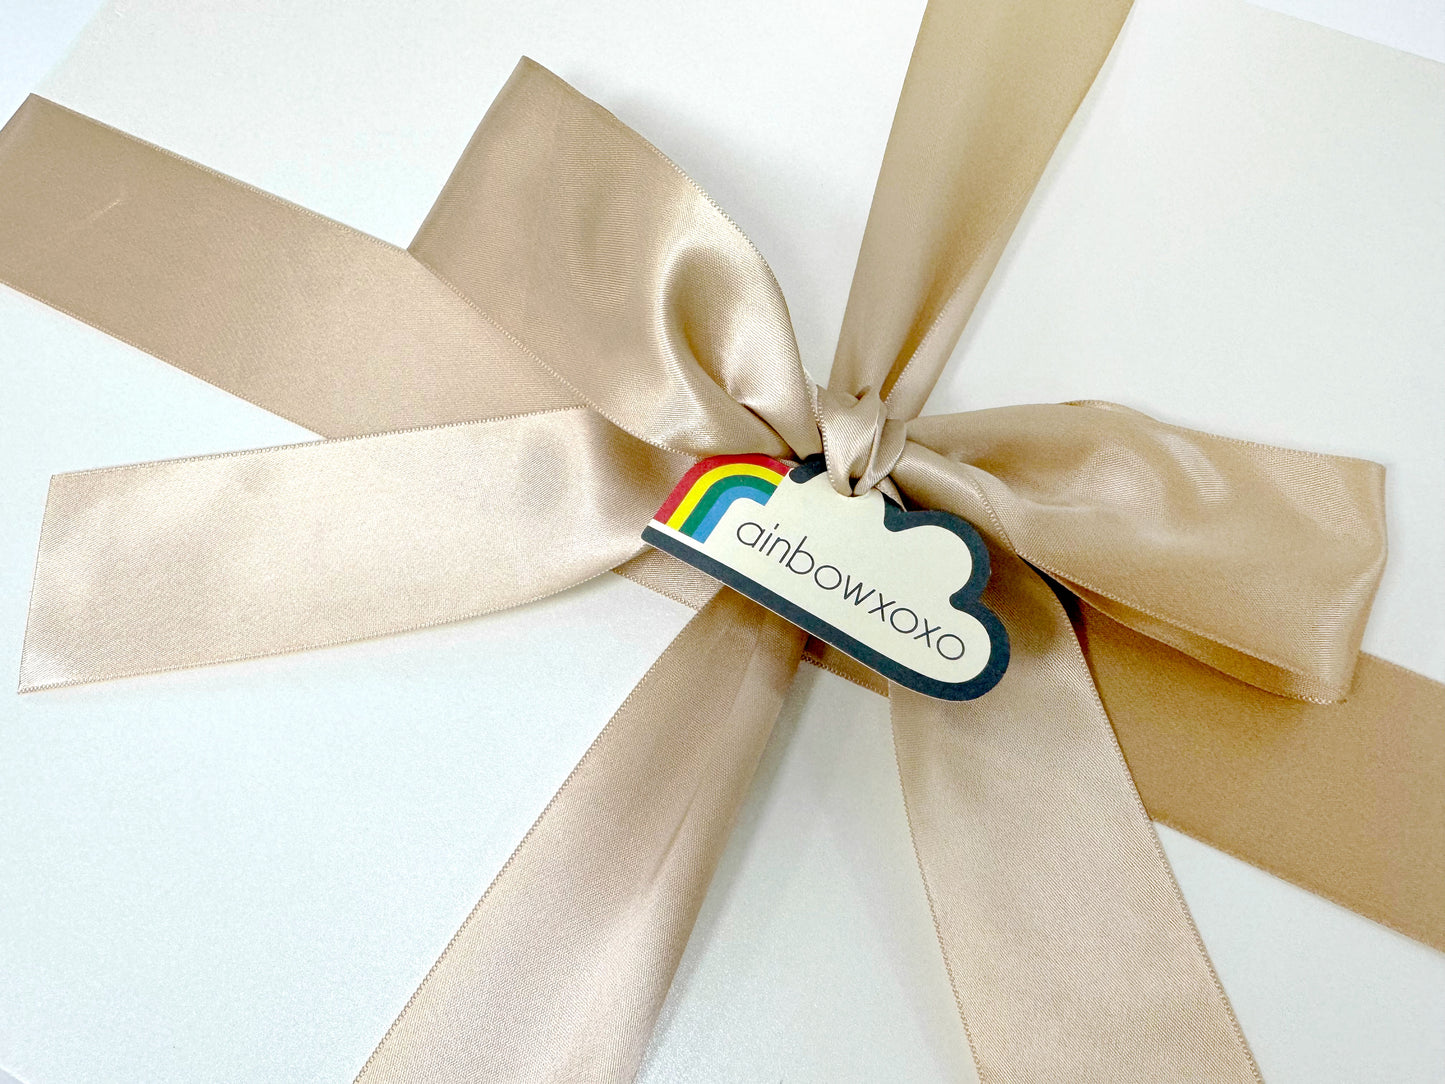 PEARL WHITE AND COFFEE-COLORED RIBBON RECTANGULAR GIFT BOX